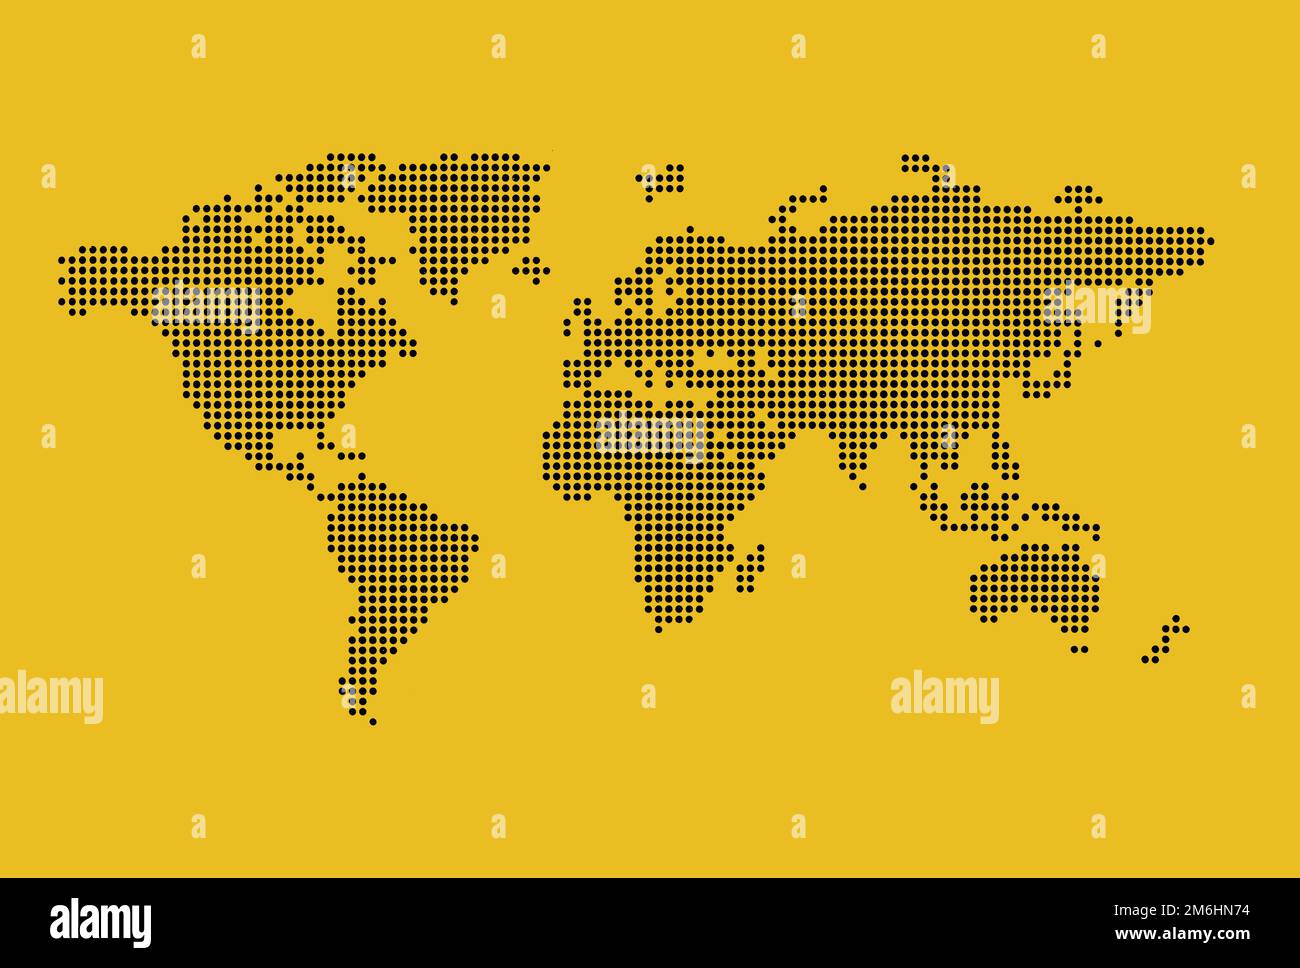 A simple world map in photo format, all gridded. Stock Photo